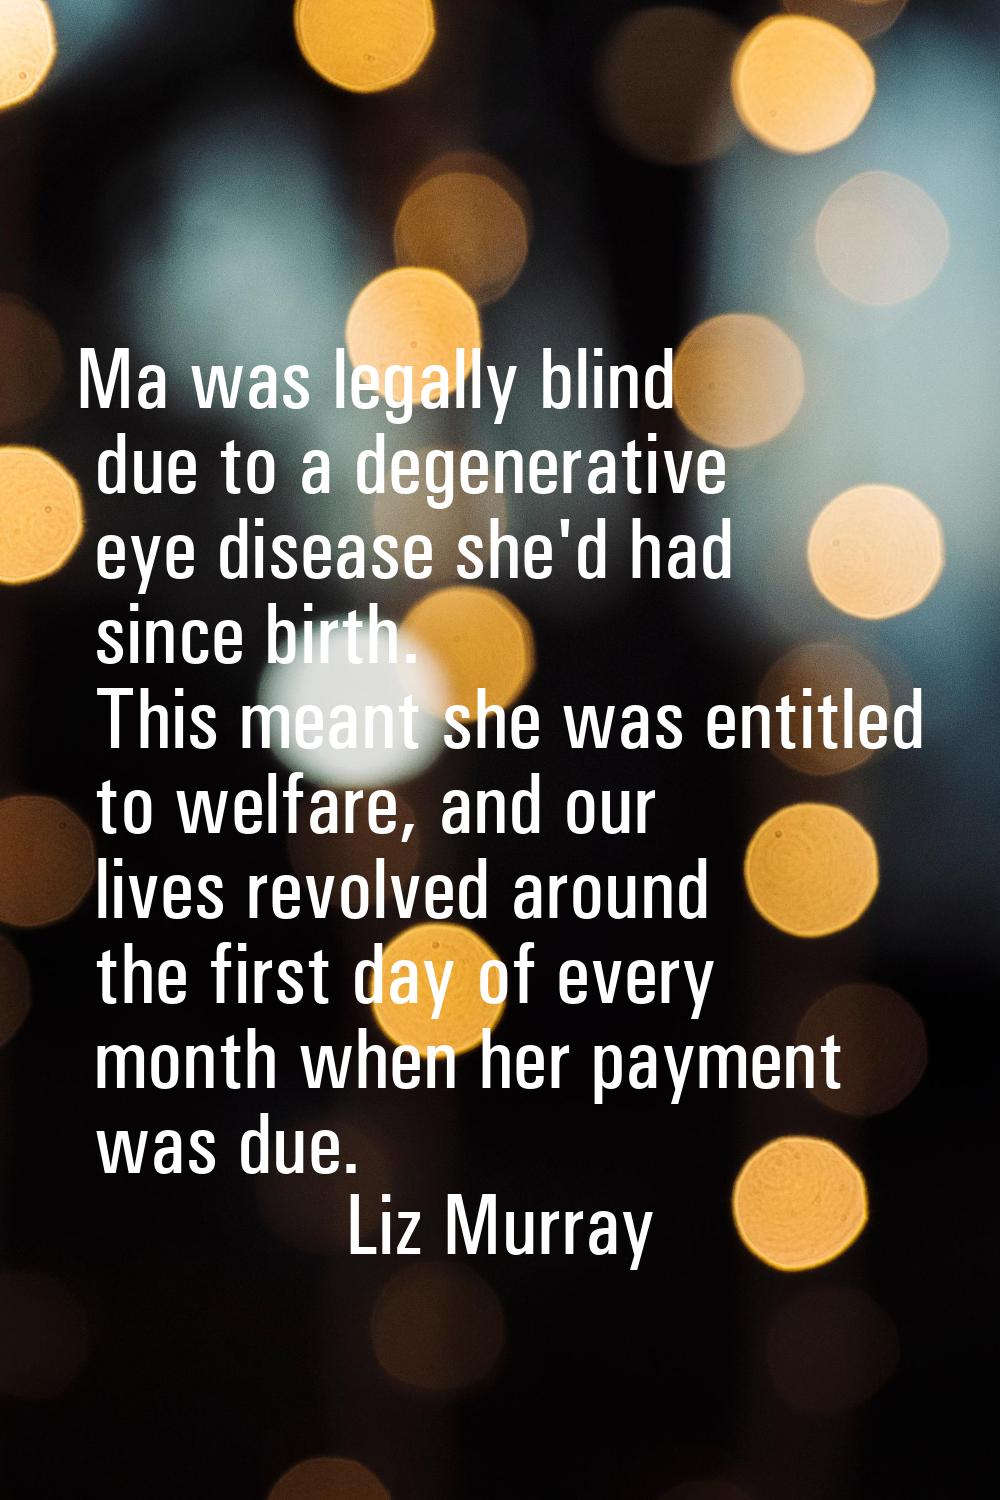 Ma was legally blind due to a degenerative eye disease she'd had since birth. This meant she was en